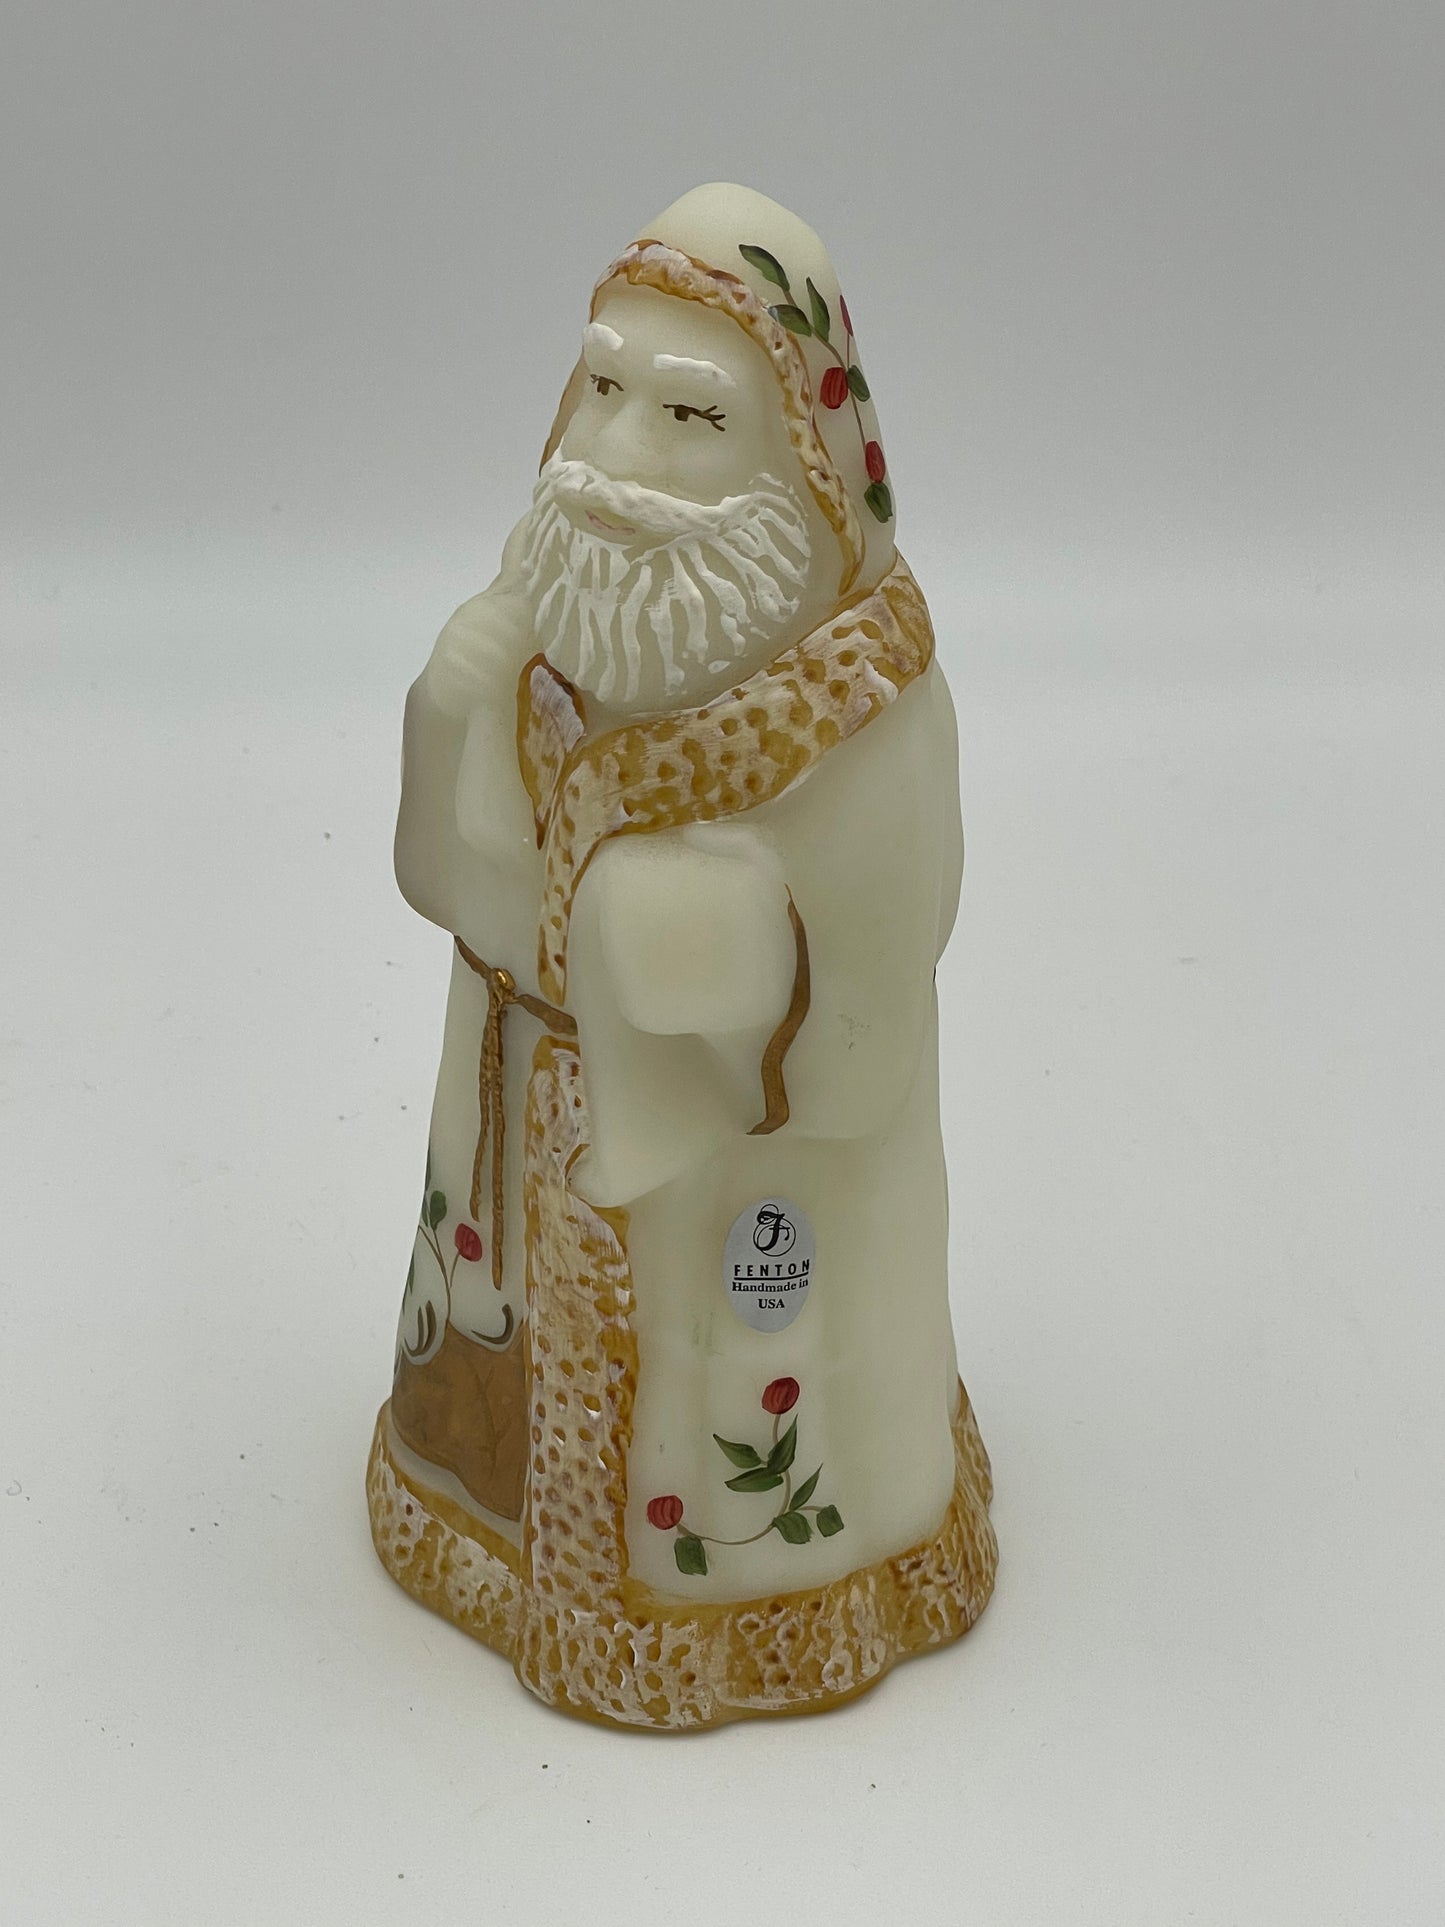 Collectable Fenton Glass TWINING BERRIES Santa Claus Hand Painted and Signed by D.Fredrick